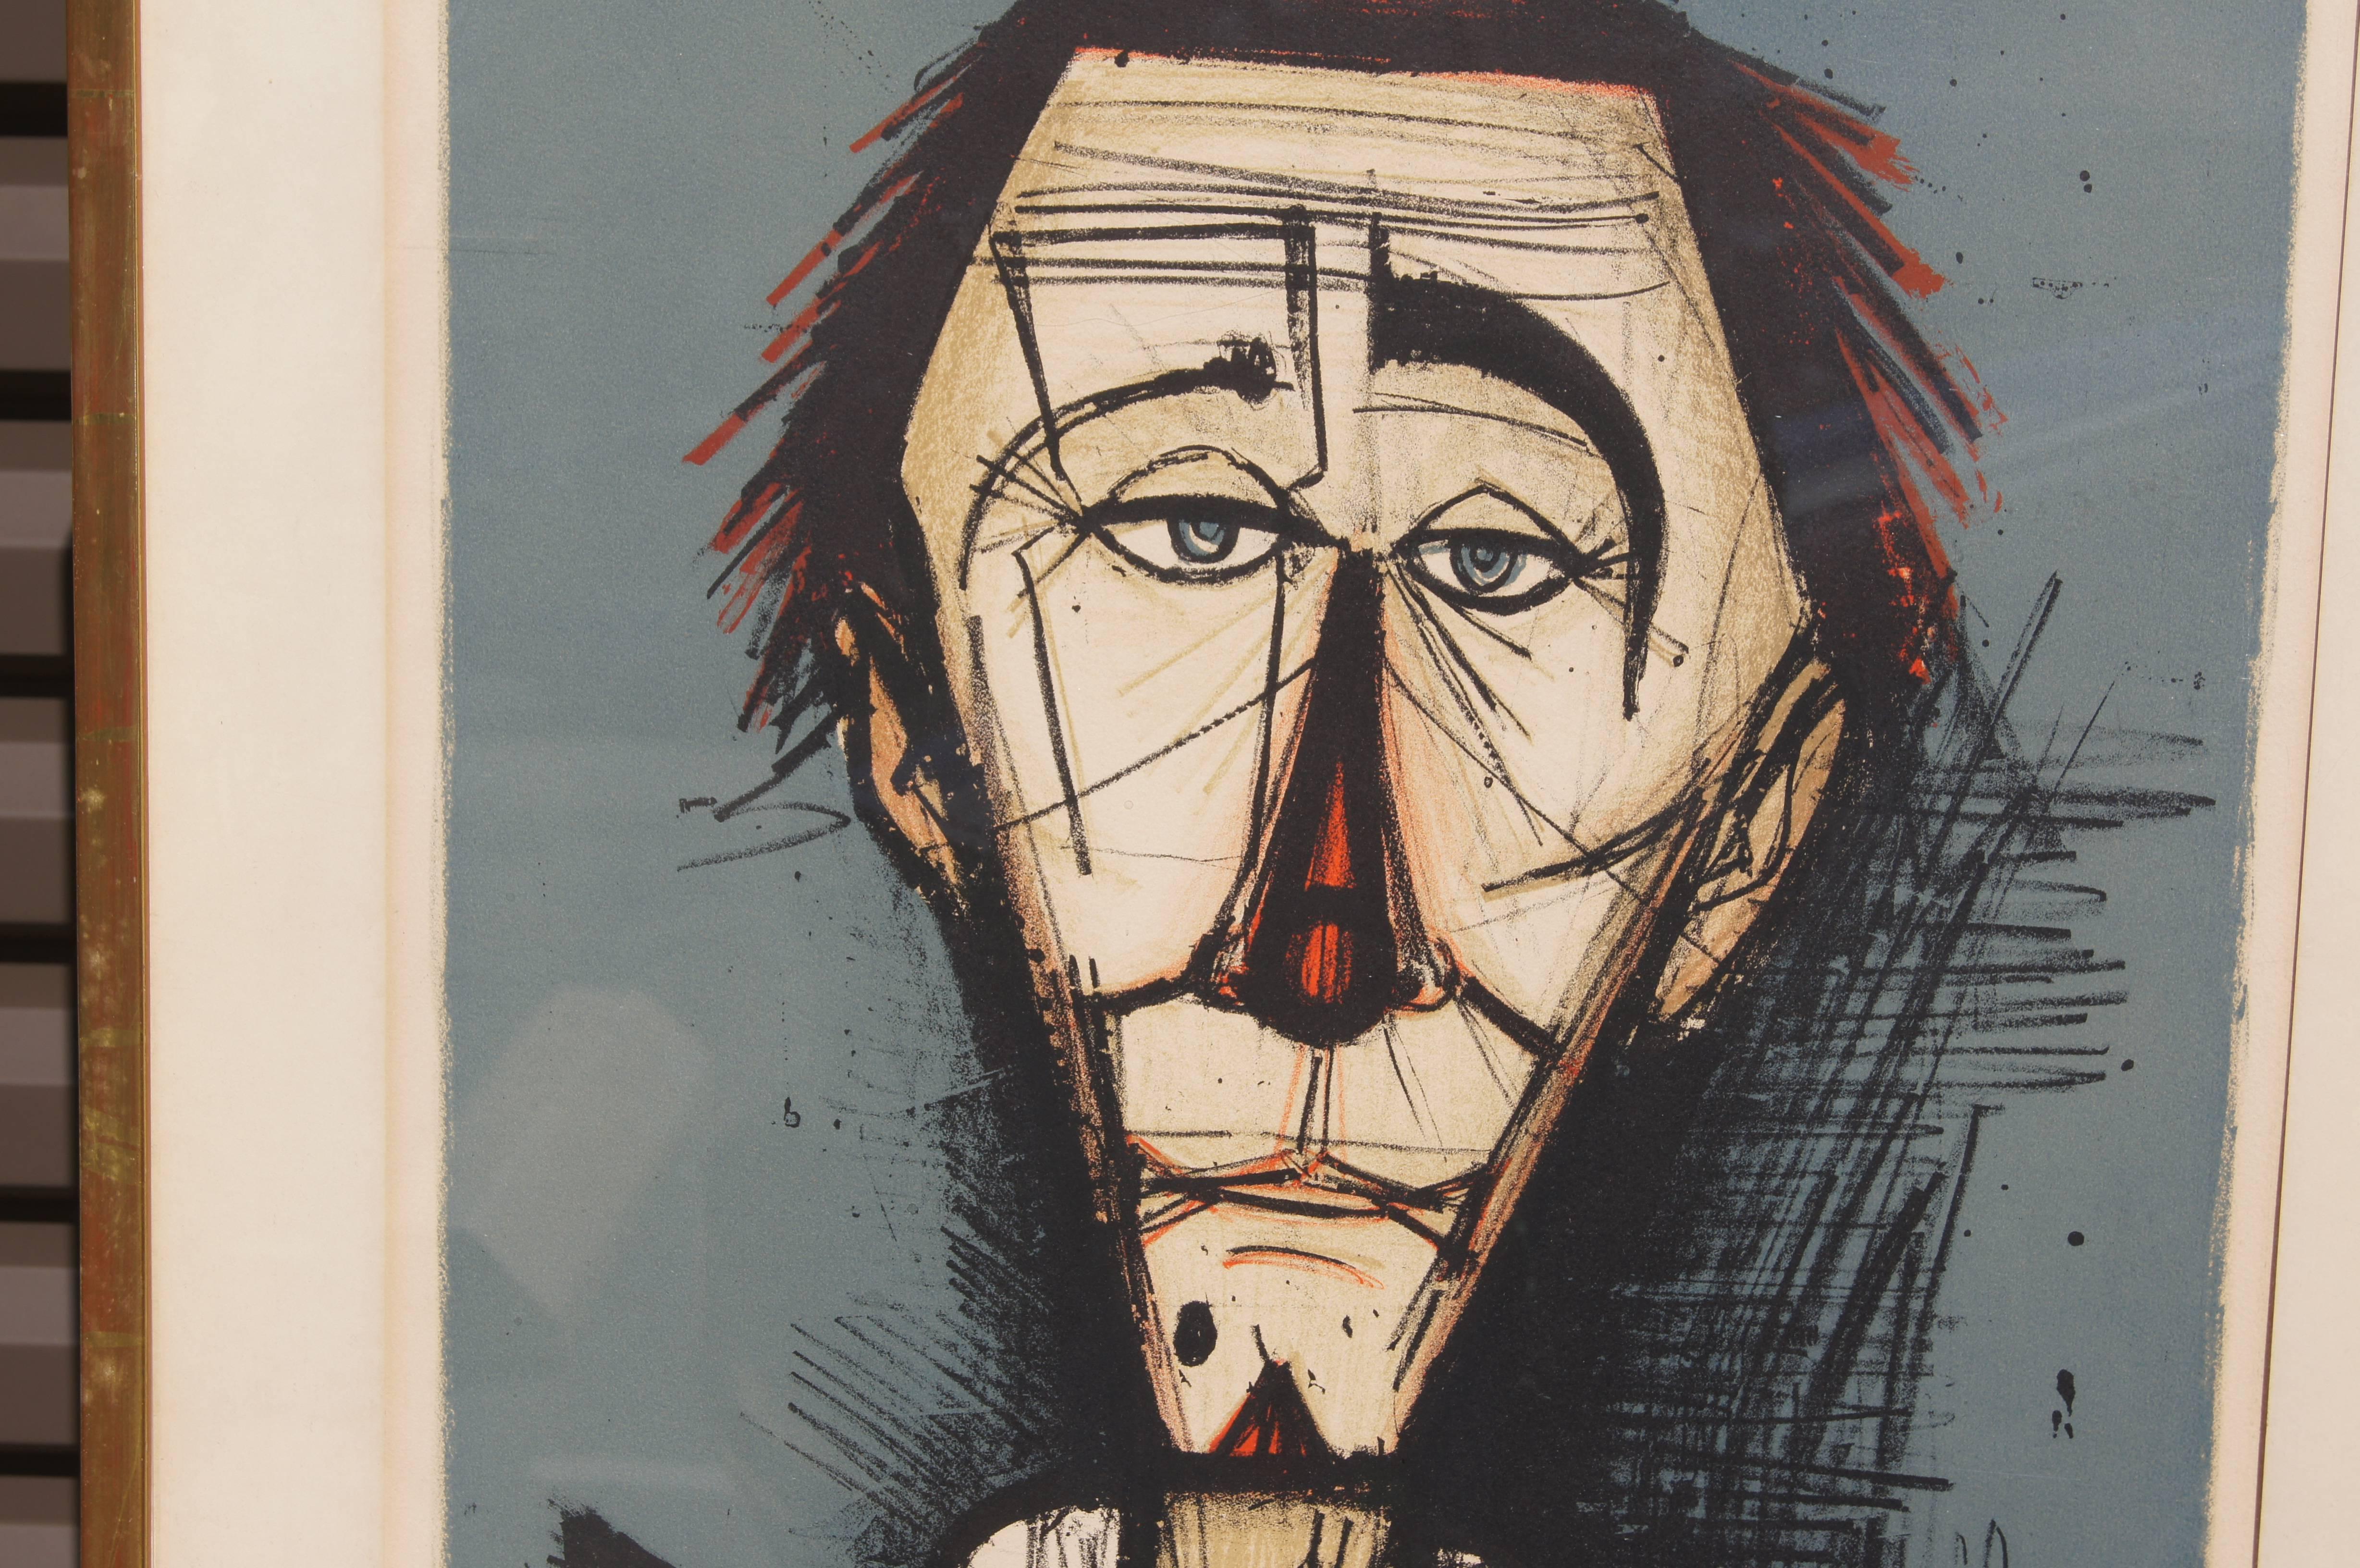 One of the artist's depictions of clown heads, this 1960s color lithograph is signed and numbered in pencil on the lower left: Bernard Buffet 32/120.

Dimensions are as framed.